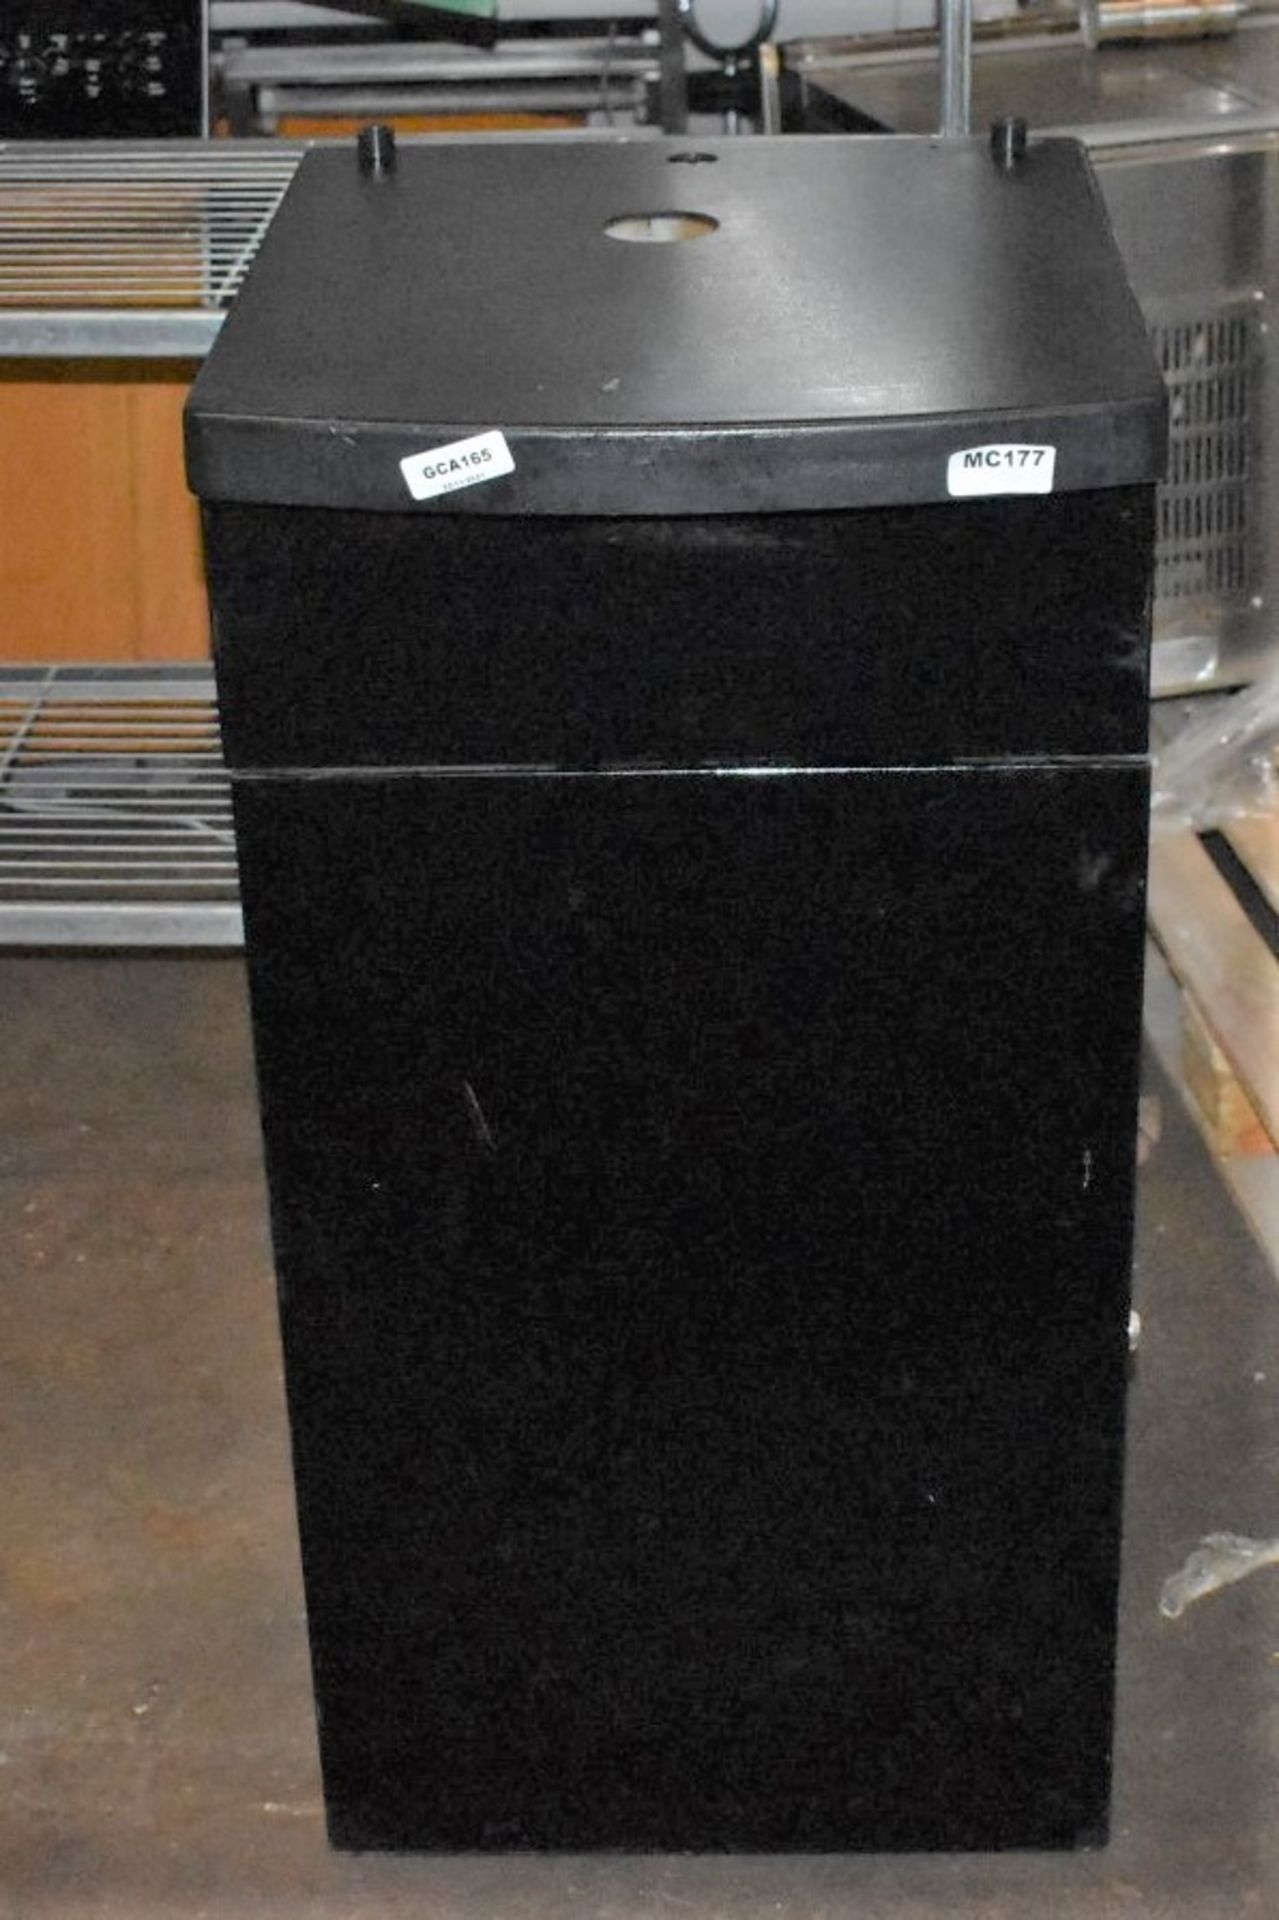 1 x Drinks Machine Cabinet in Black - Size H90 x W45 x D43 cms - CL011 - Ref GCA165 WH5 - - Image 6 of 8